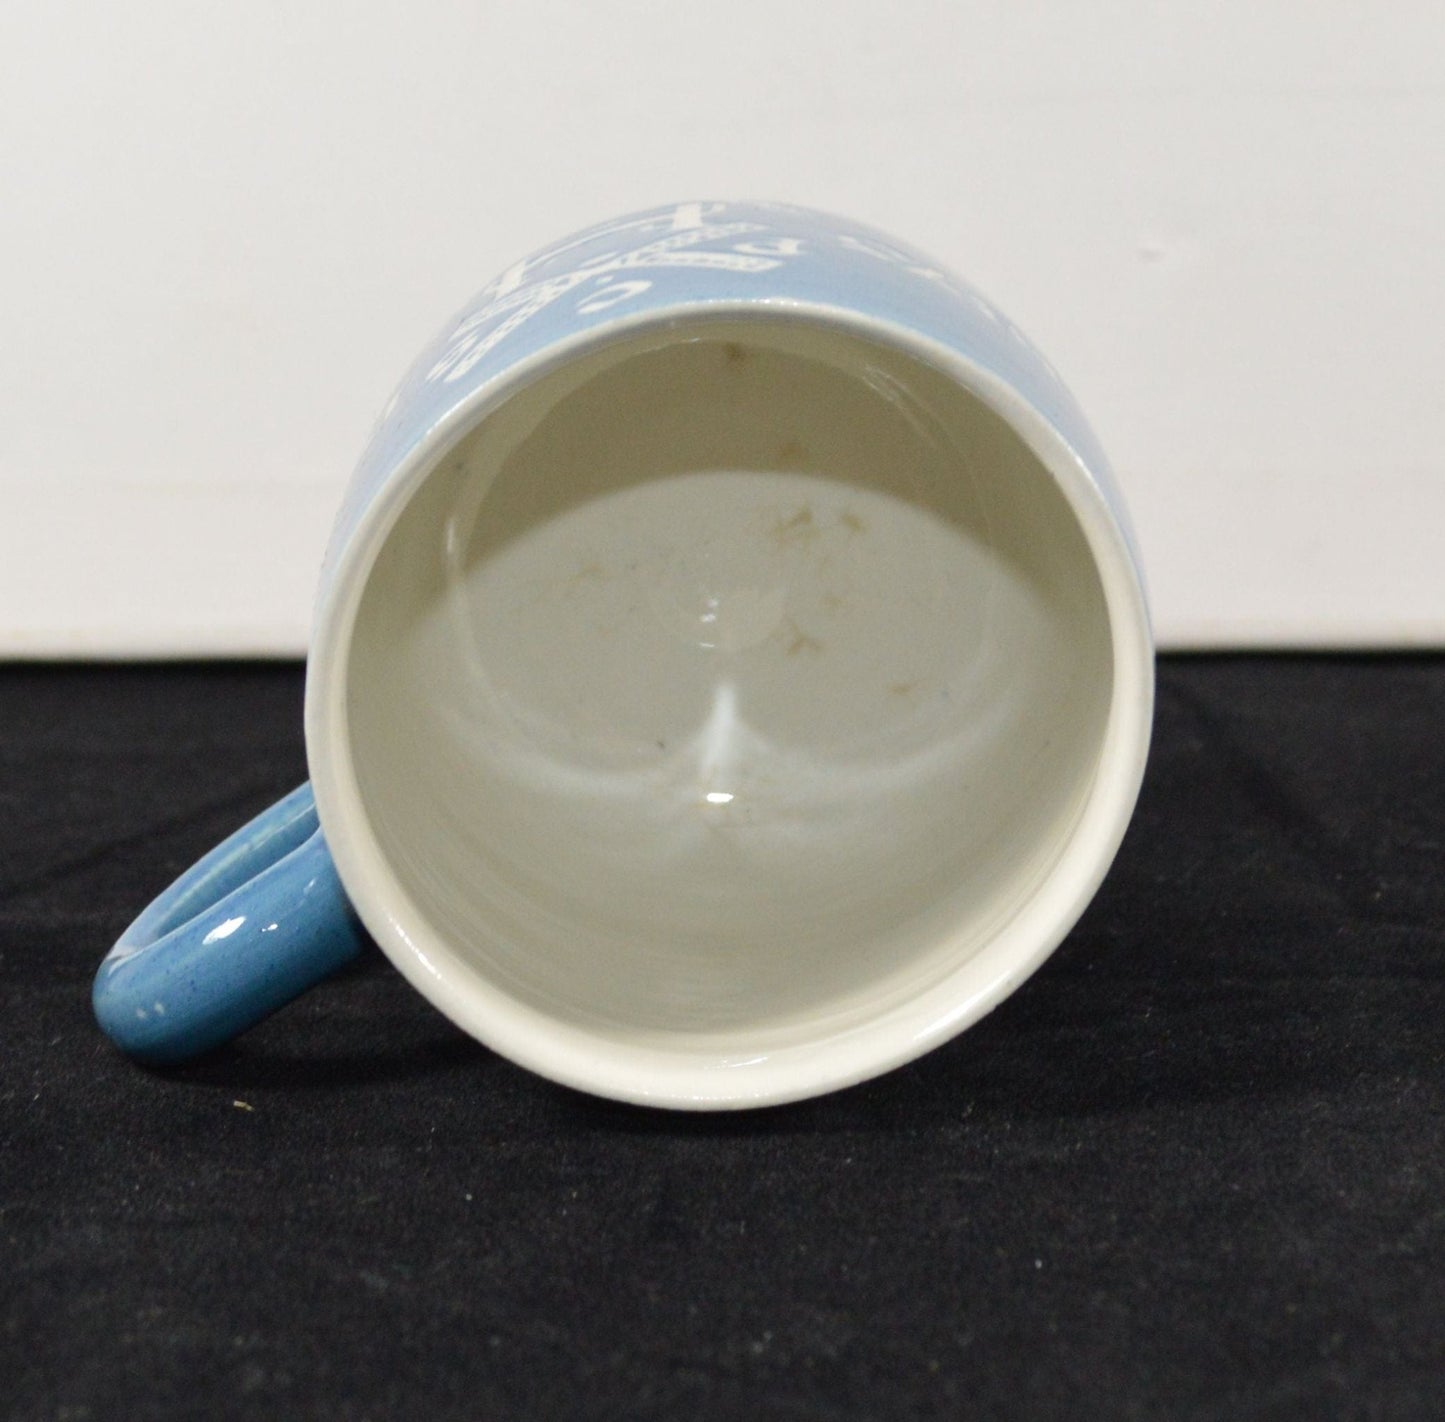 TABLEWARE SMALL BLUE CUP DEPICTING WINDMILL(PREVIOUSLY OWNED) GOOD CONDITION - TMD167207